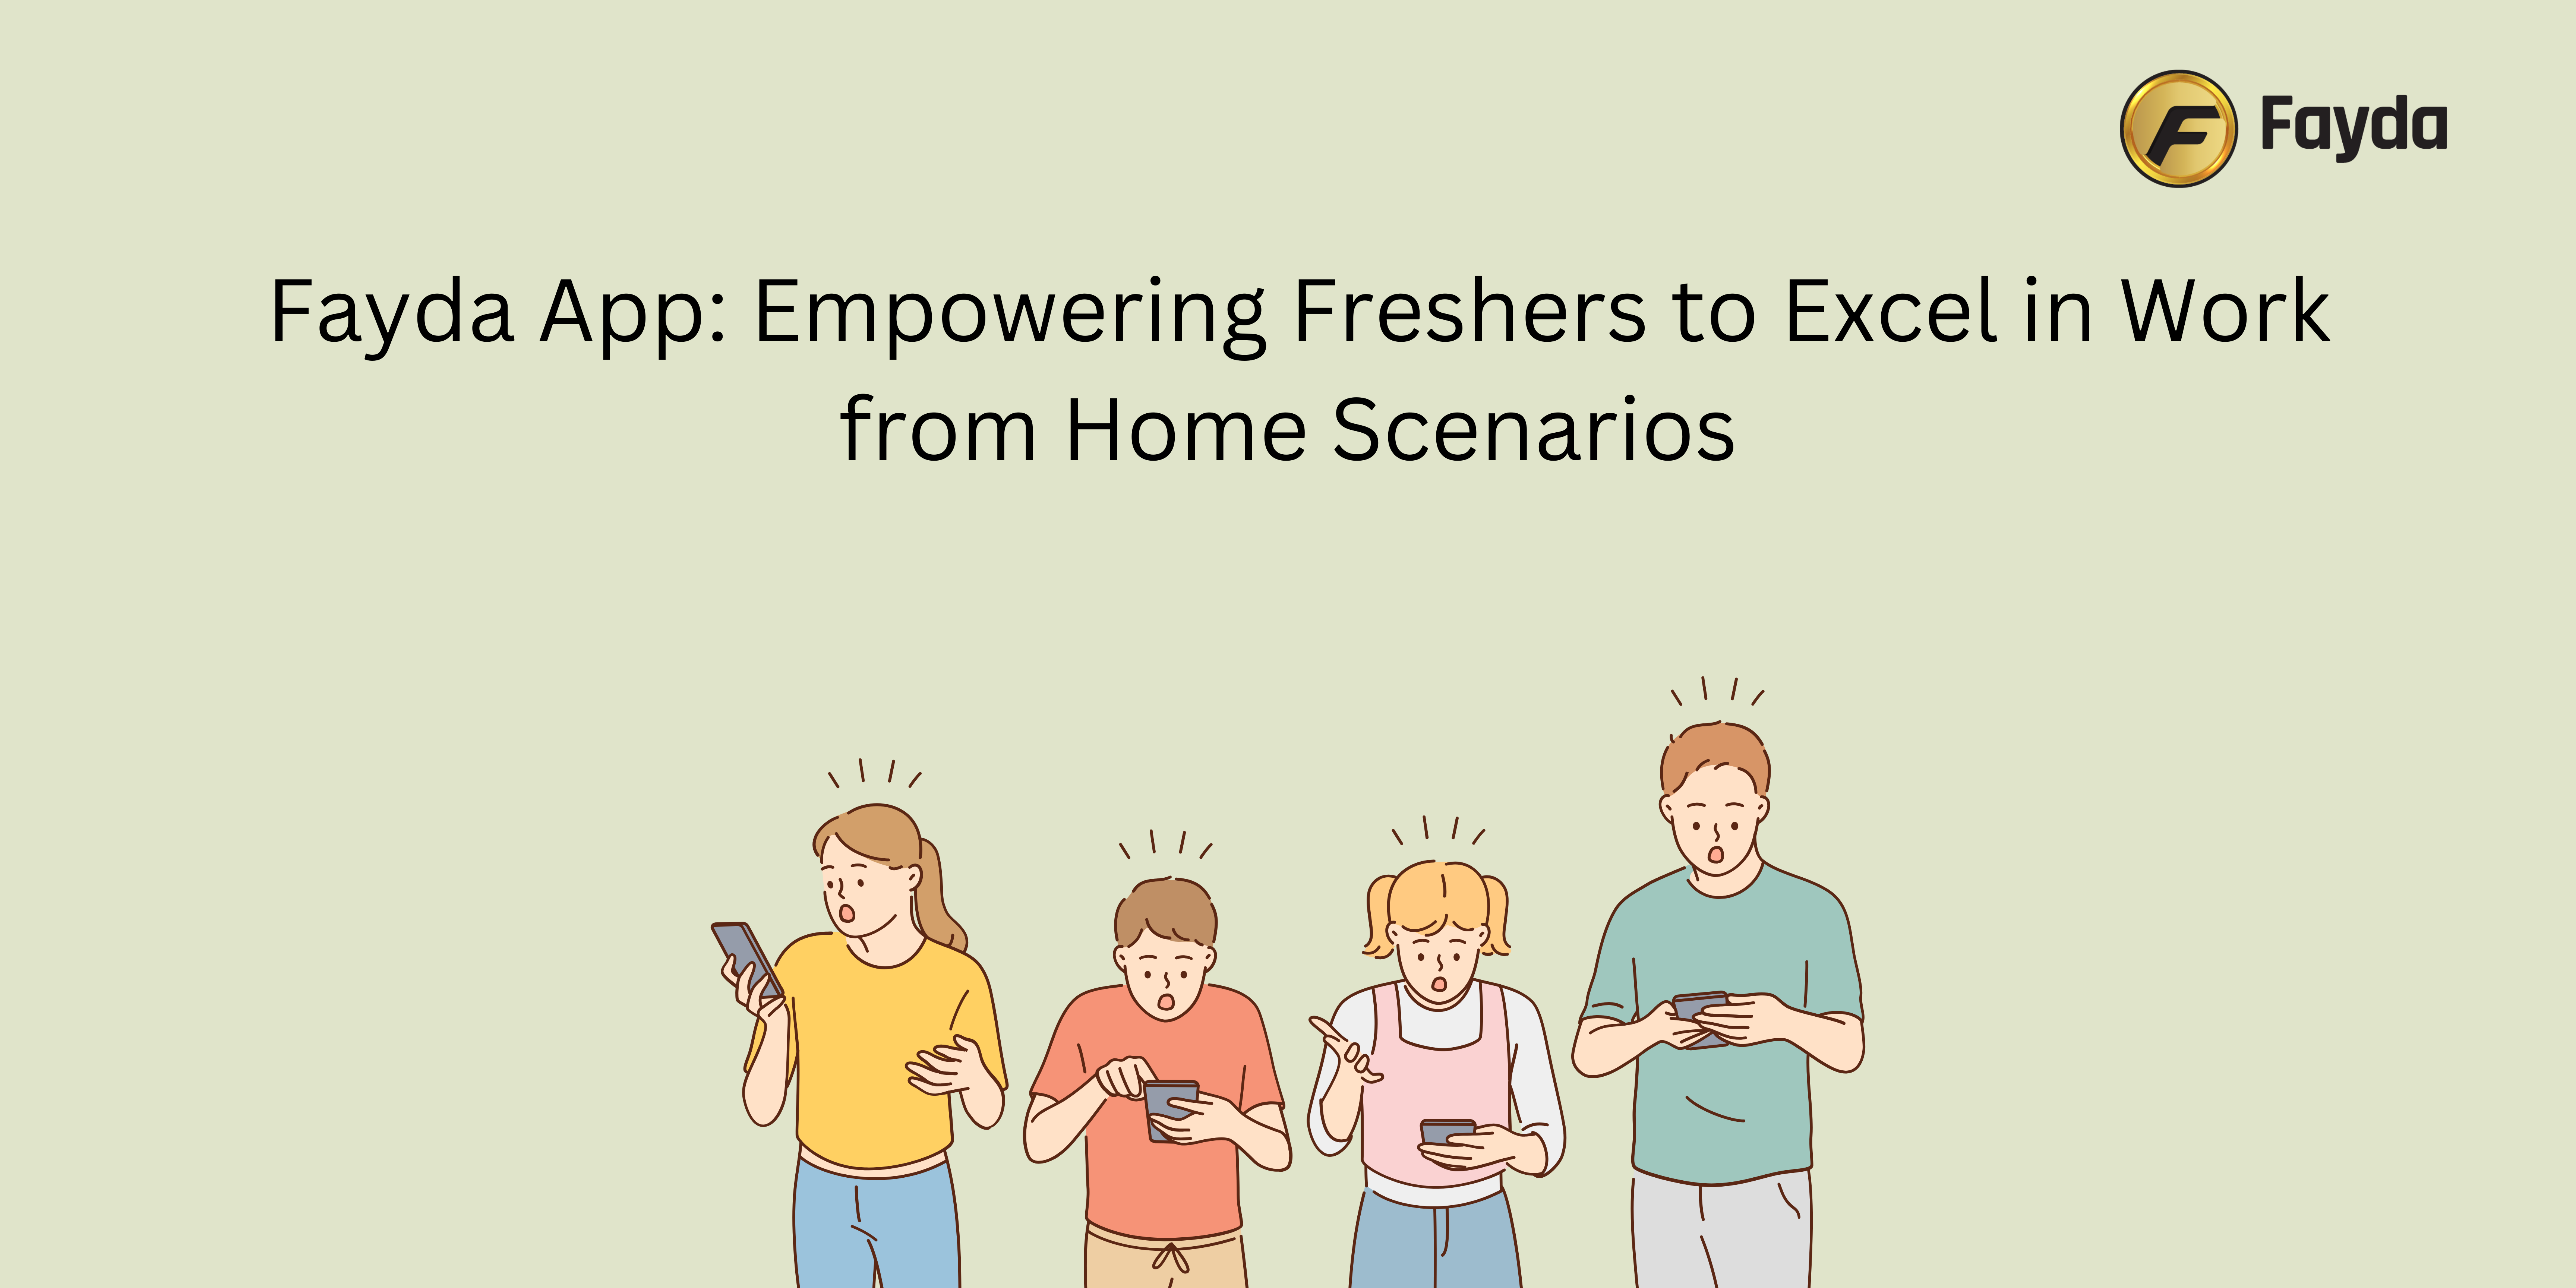 Fayda App: Empowering Freshers to Excel in Work from Home Scenarios